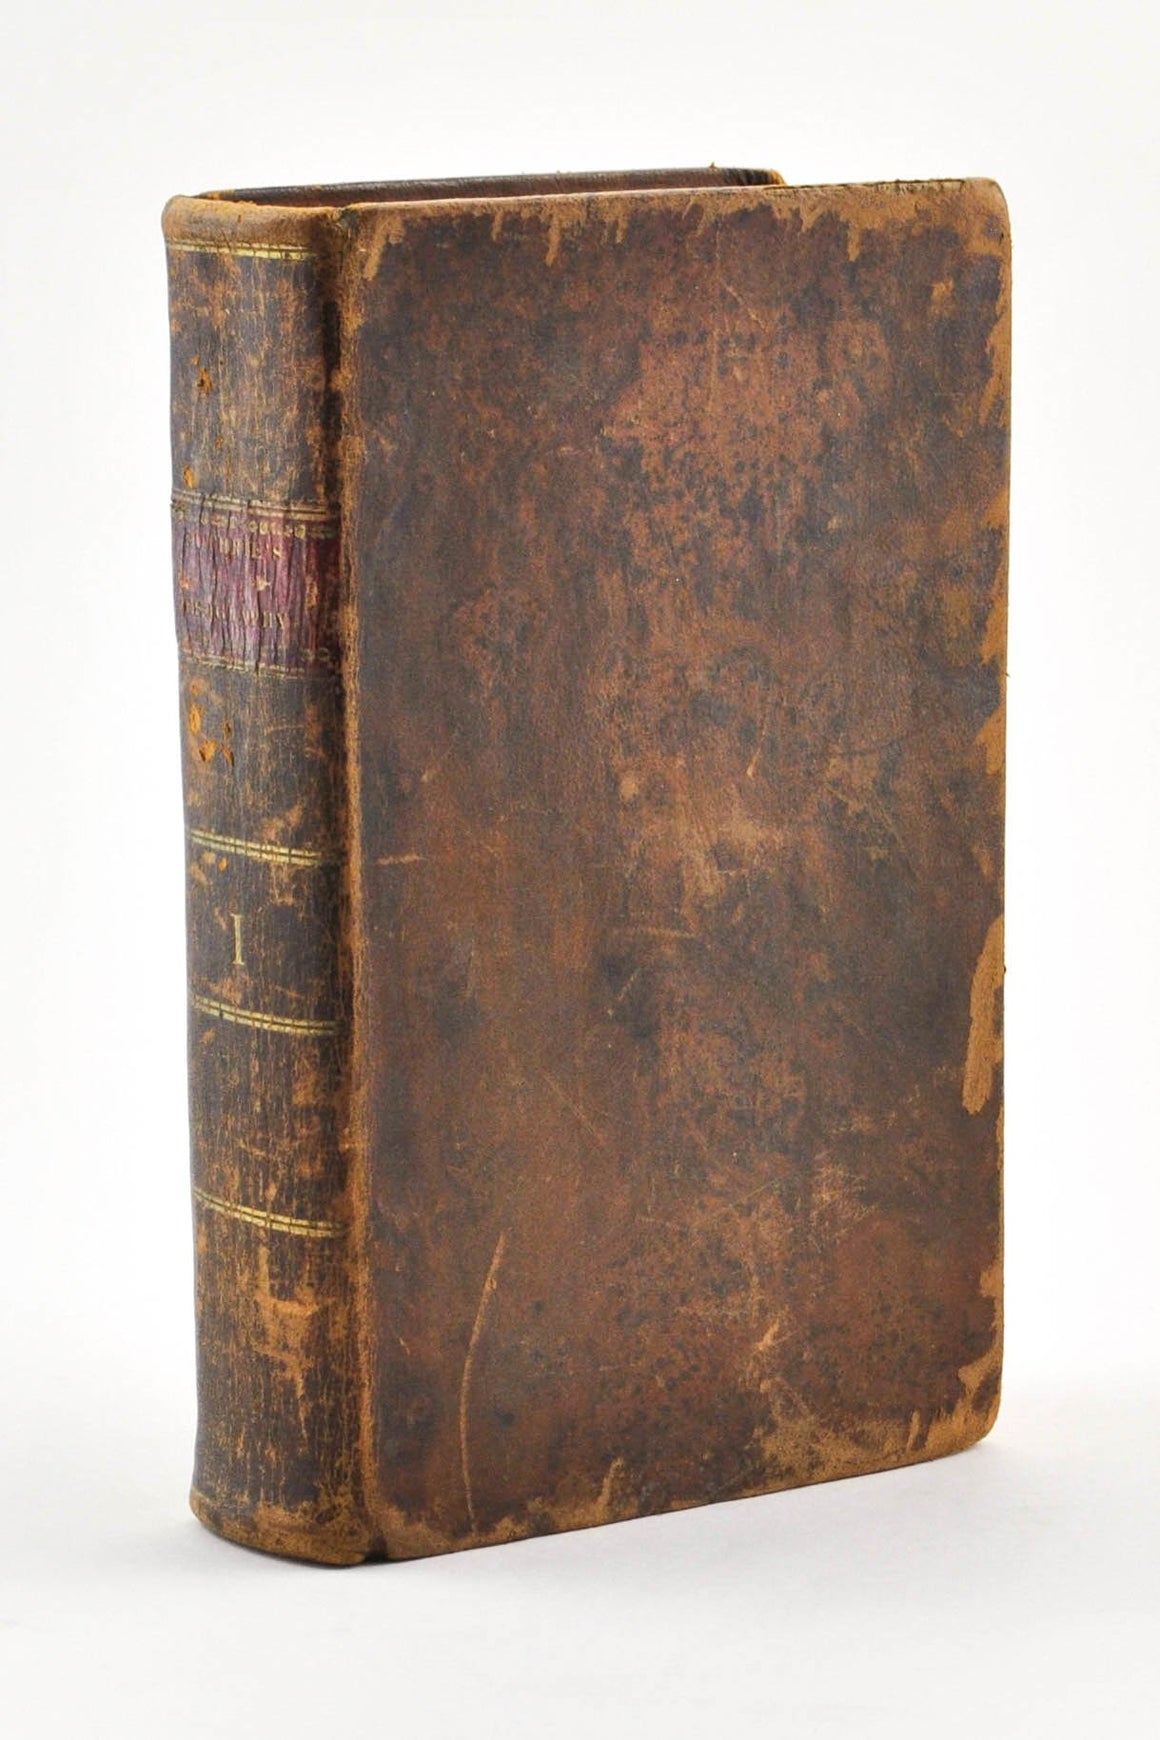 A New Geographical Historical and Commercial Grammar by William Guthrie 1809